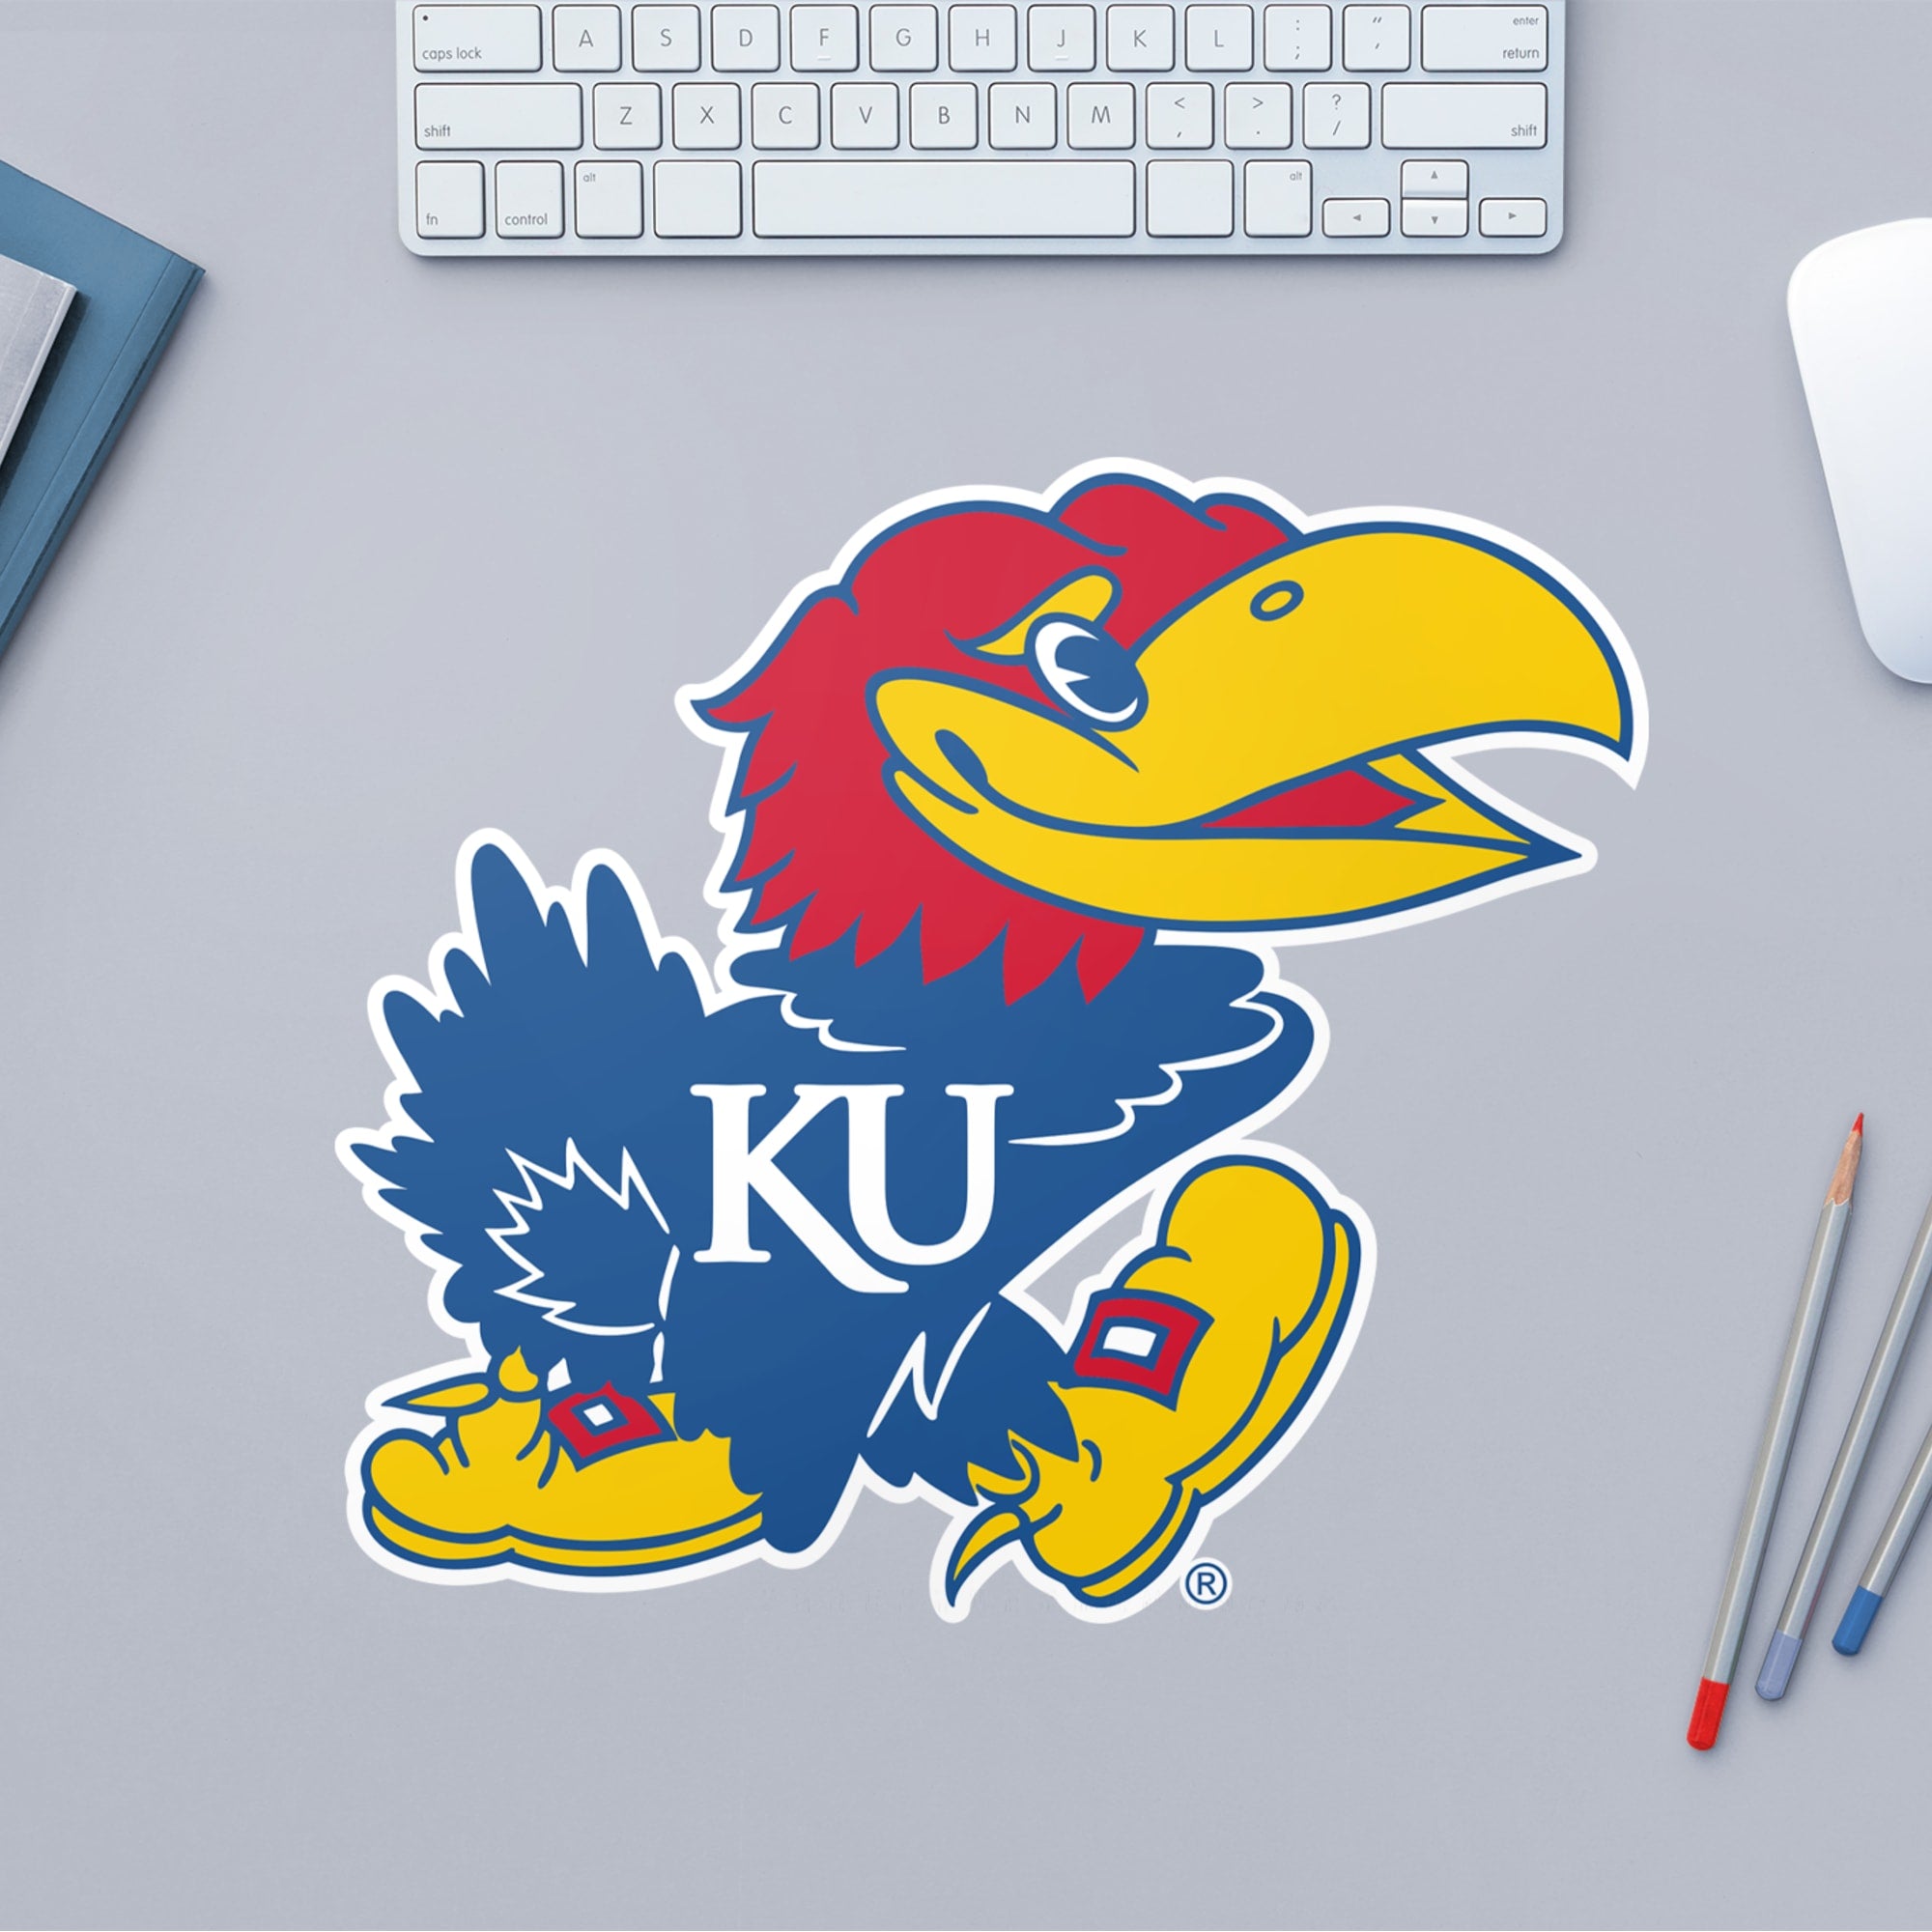 Kansas Jayhawks: Logo - Officially Licensed Removable Wall Decal 12.0"W x 10.0"H by Fathead | Vinyl